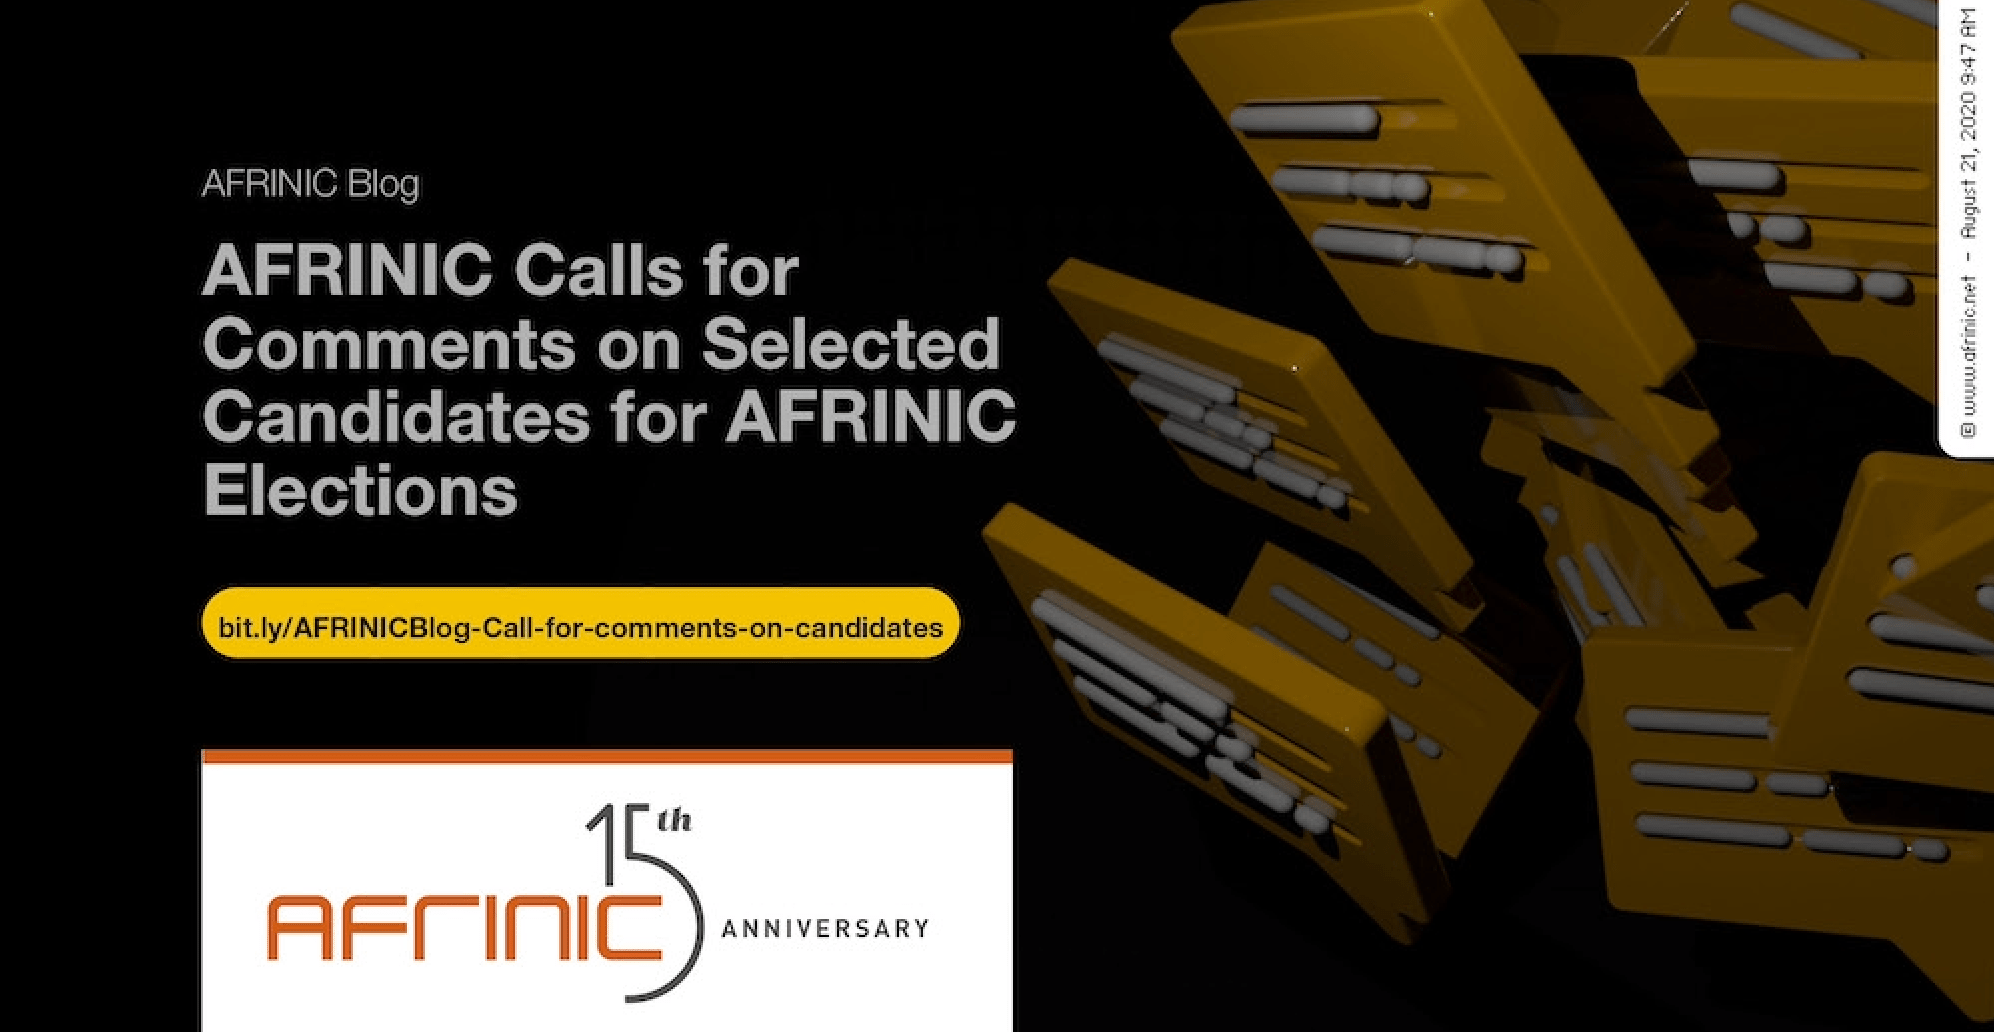 AFRINIC Calls for Comments on Selected Candidates for AFRINIC Elections